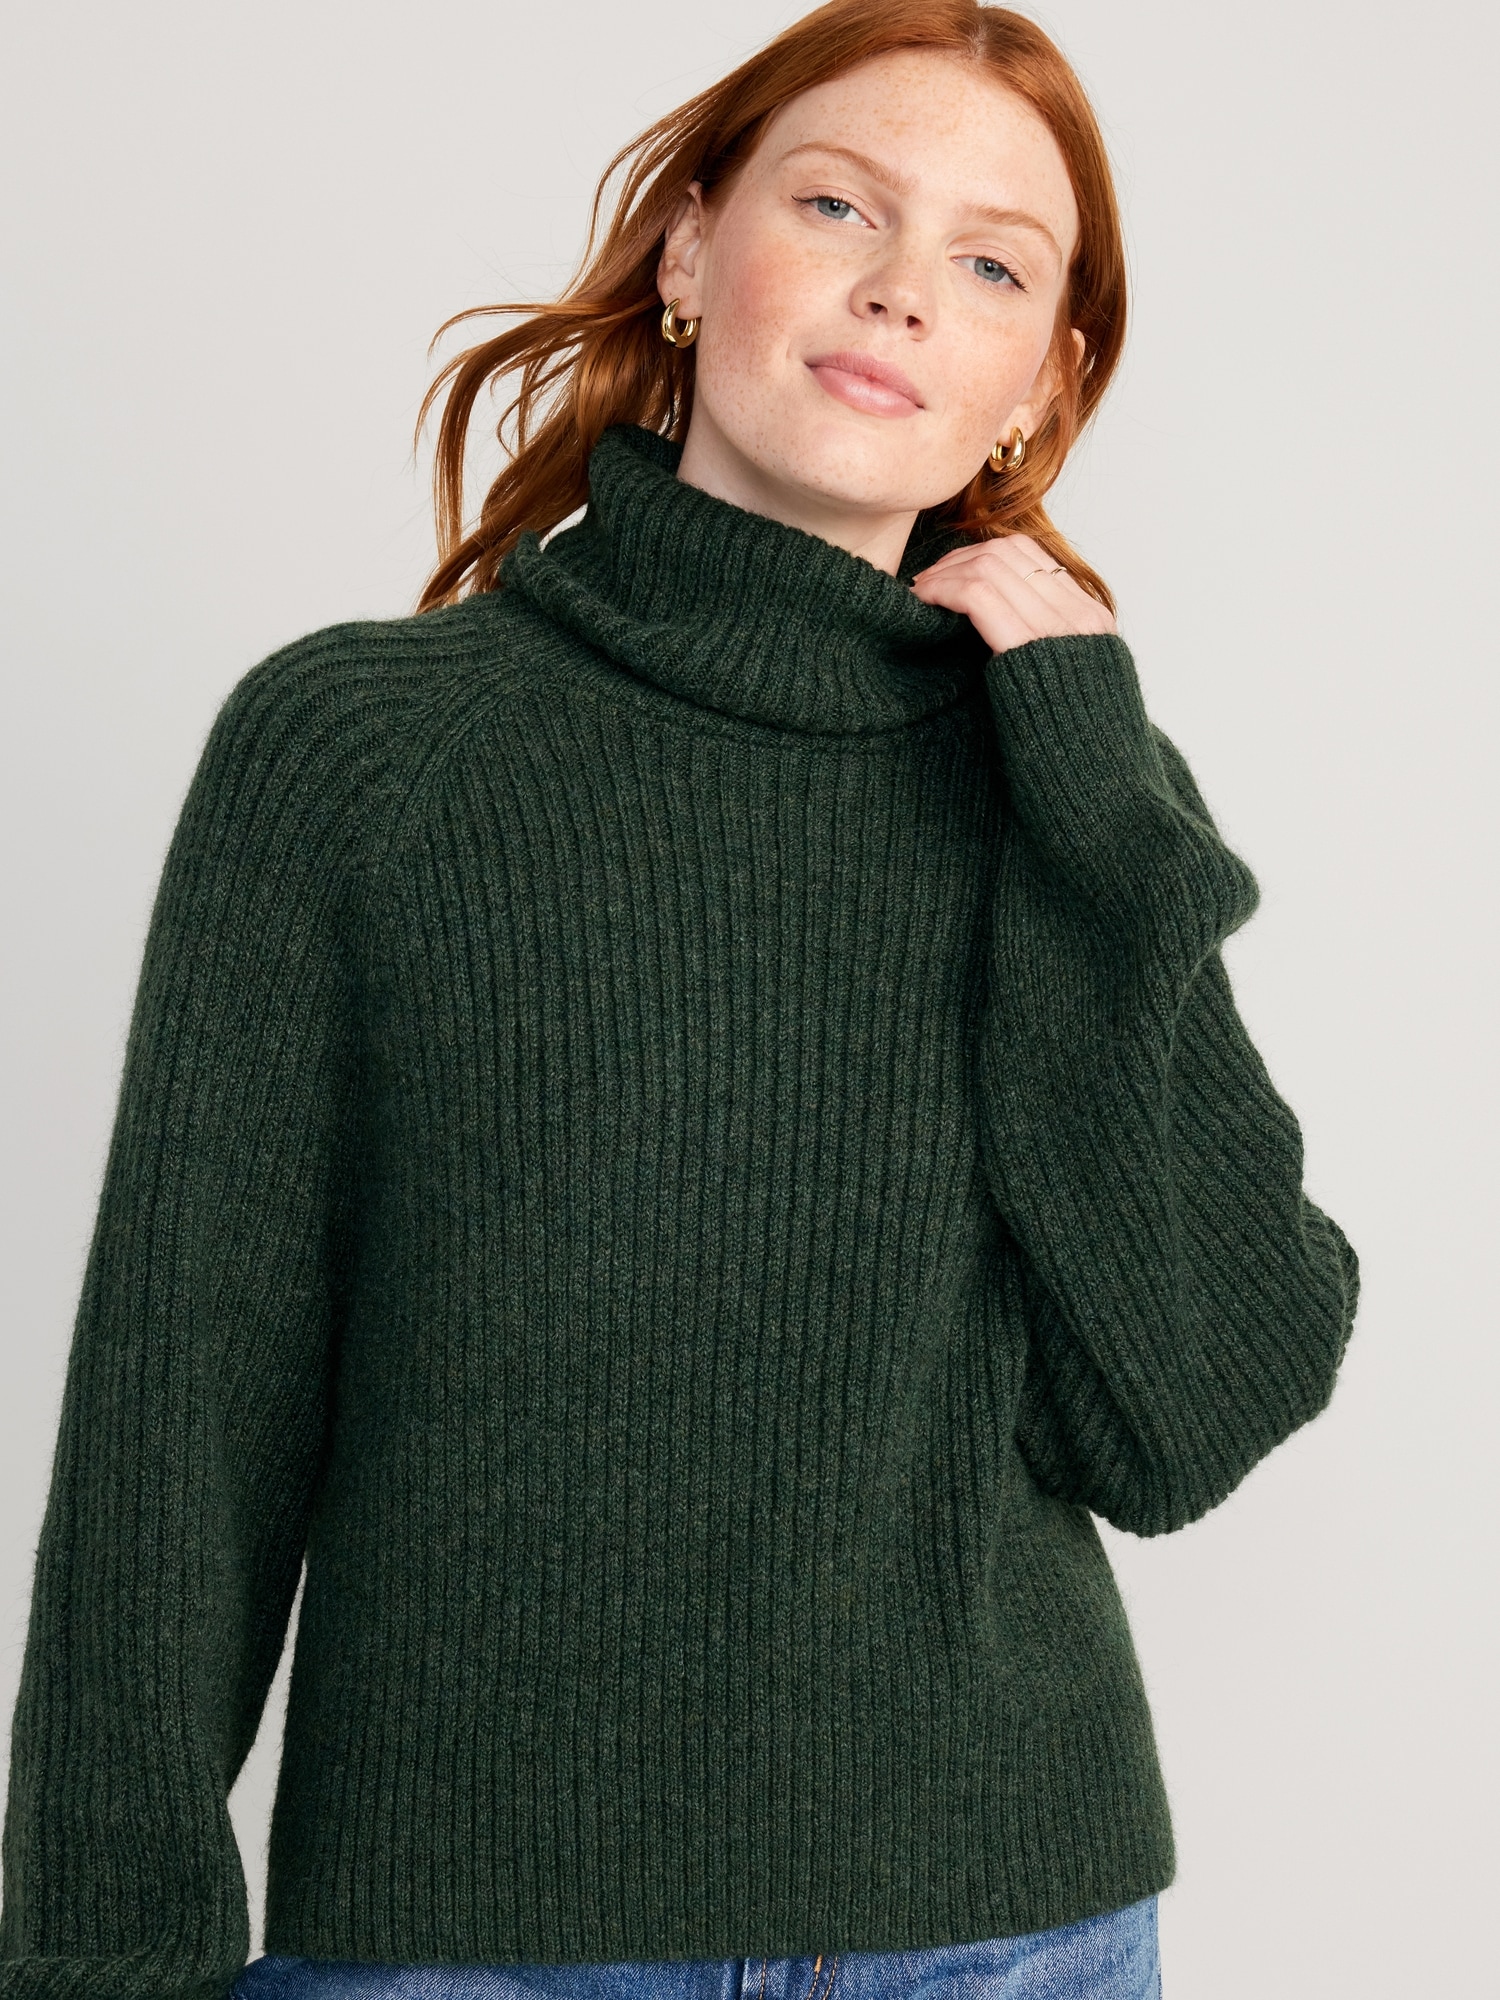 Cropped Turtleneck Sweater | Old Navy